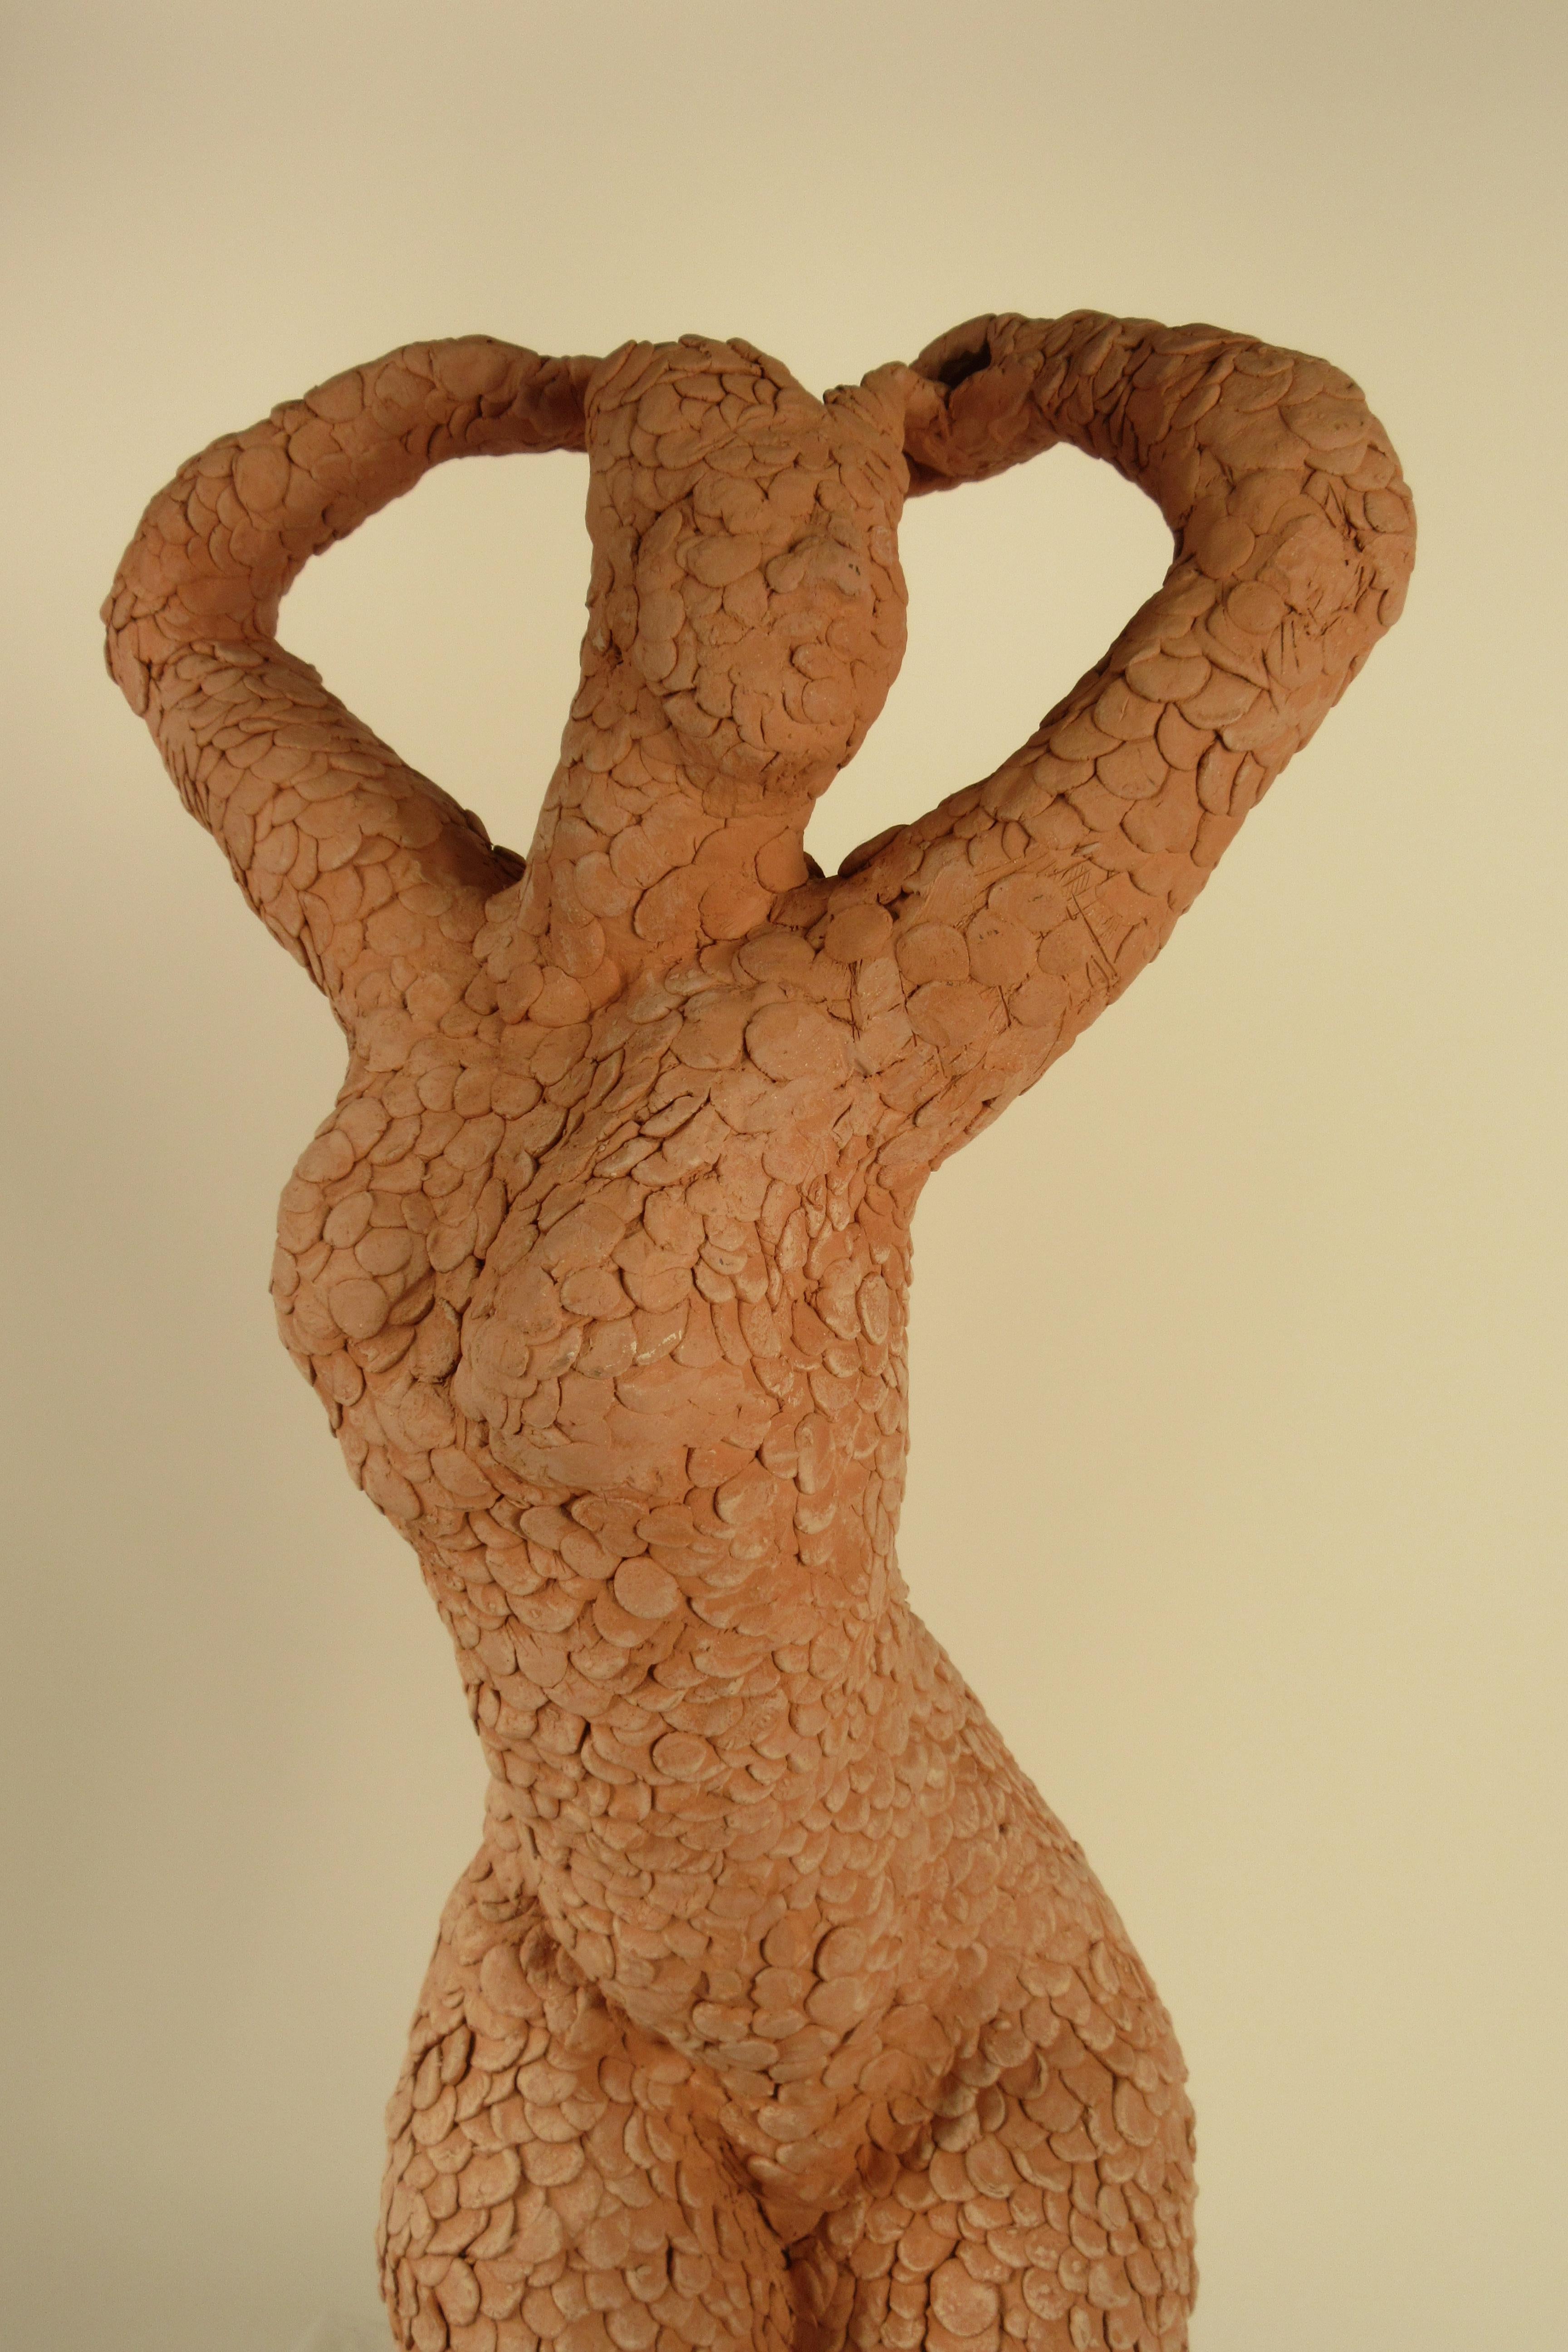 1960s textured clay sculpture of nude woman.